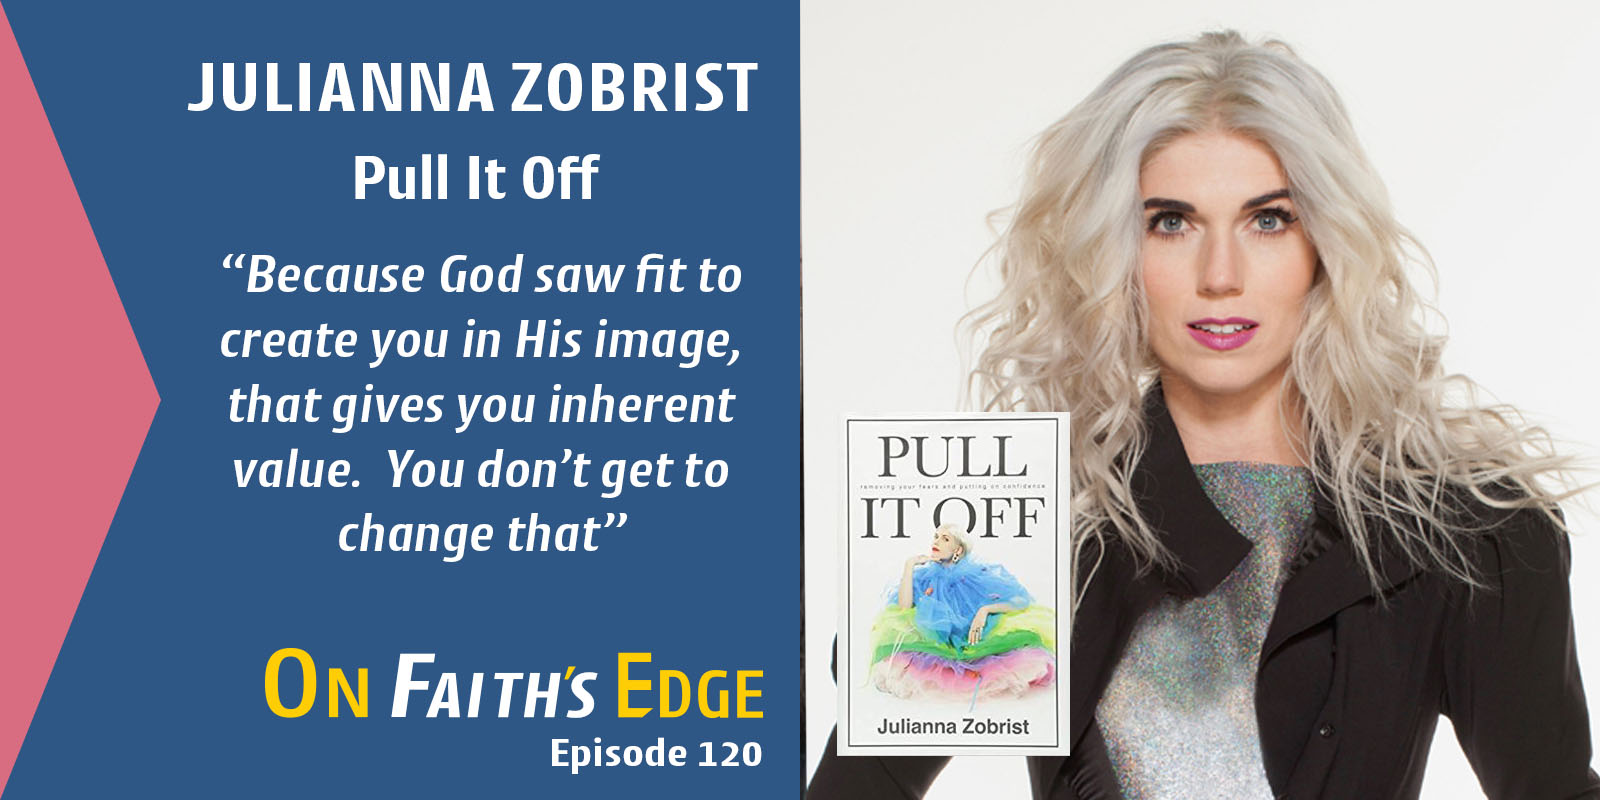 Can You Pull It Off? | Author Julianna Zobrist